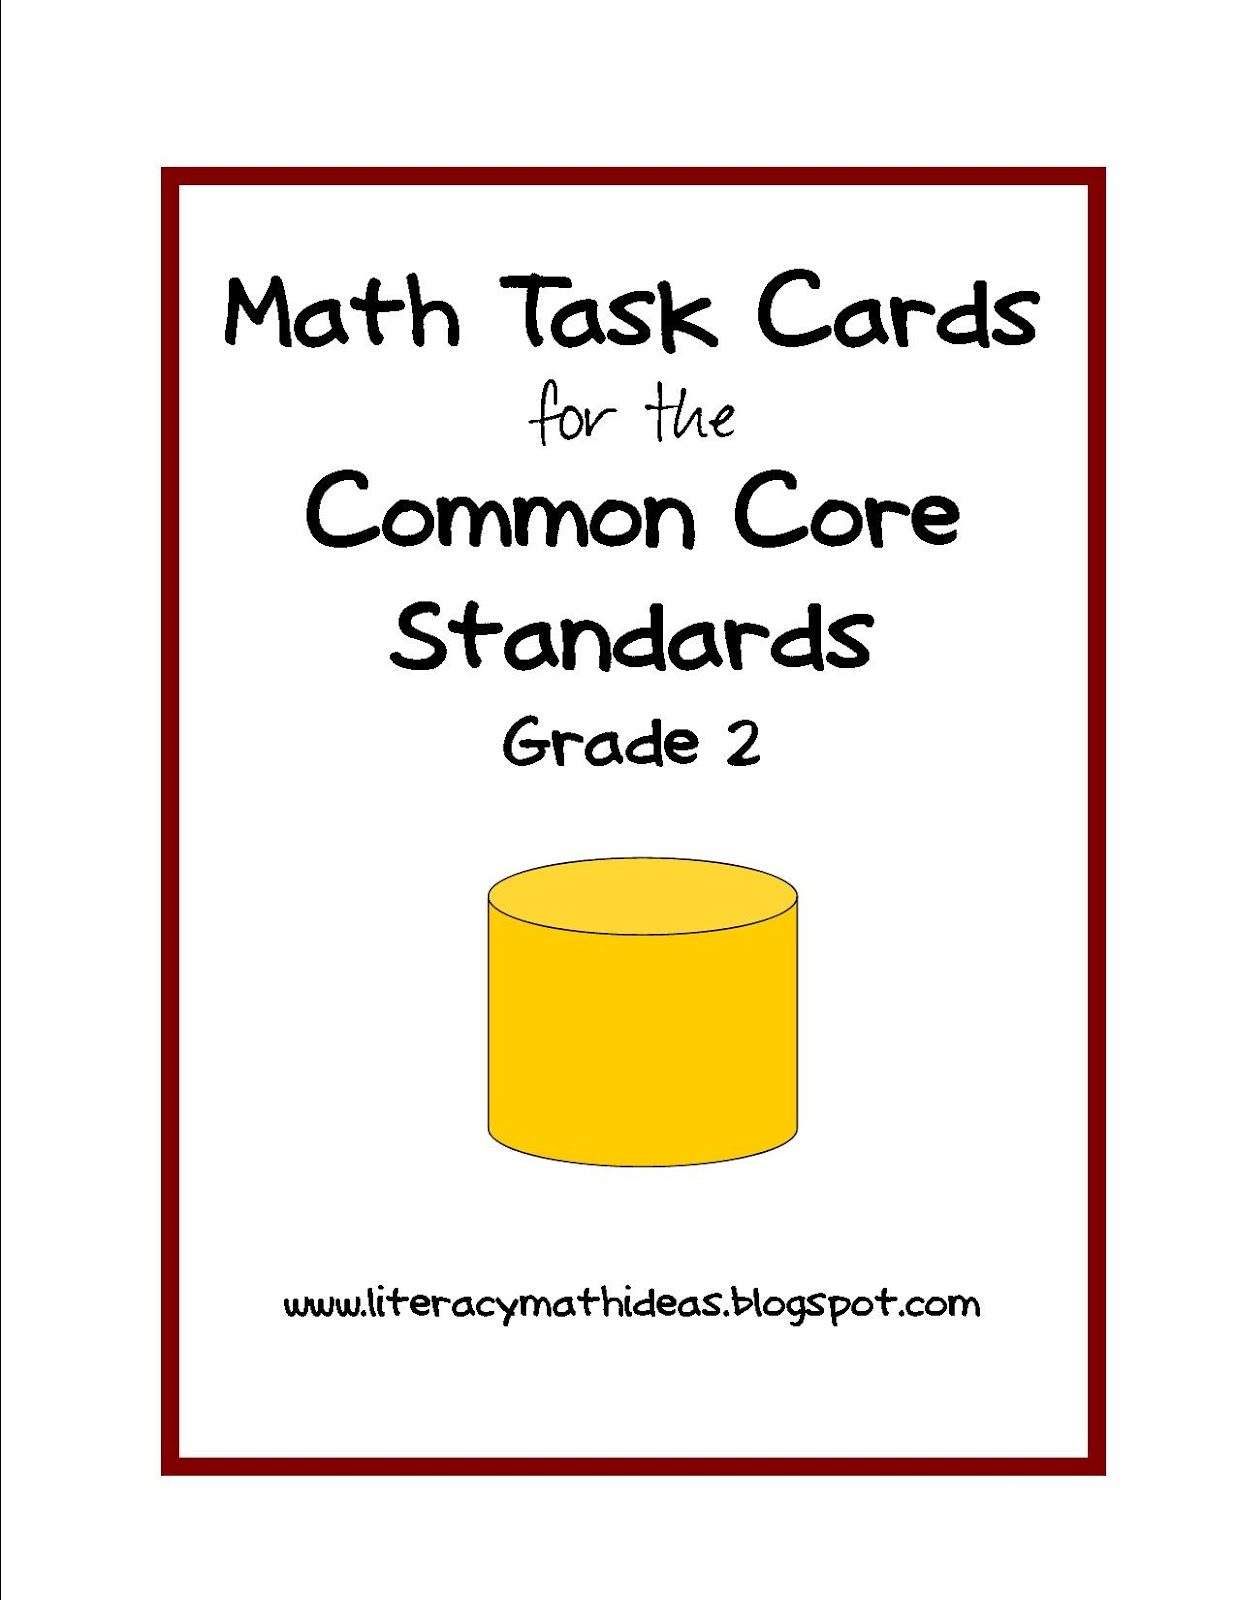 literacy-math-ideas-math-common-core-standards-task-cards-for-grades-1-and-2